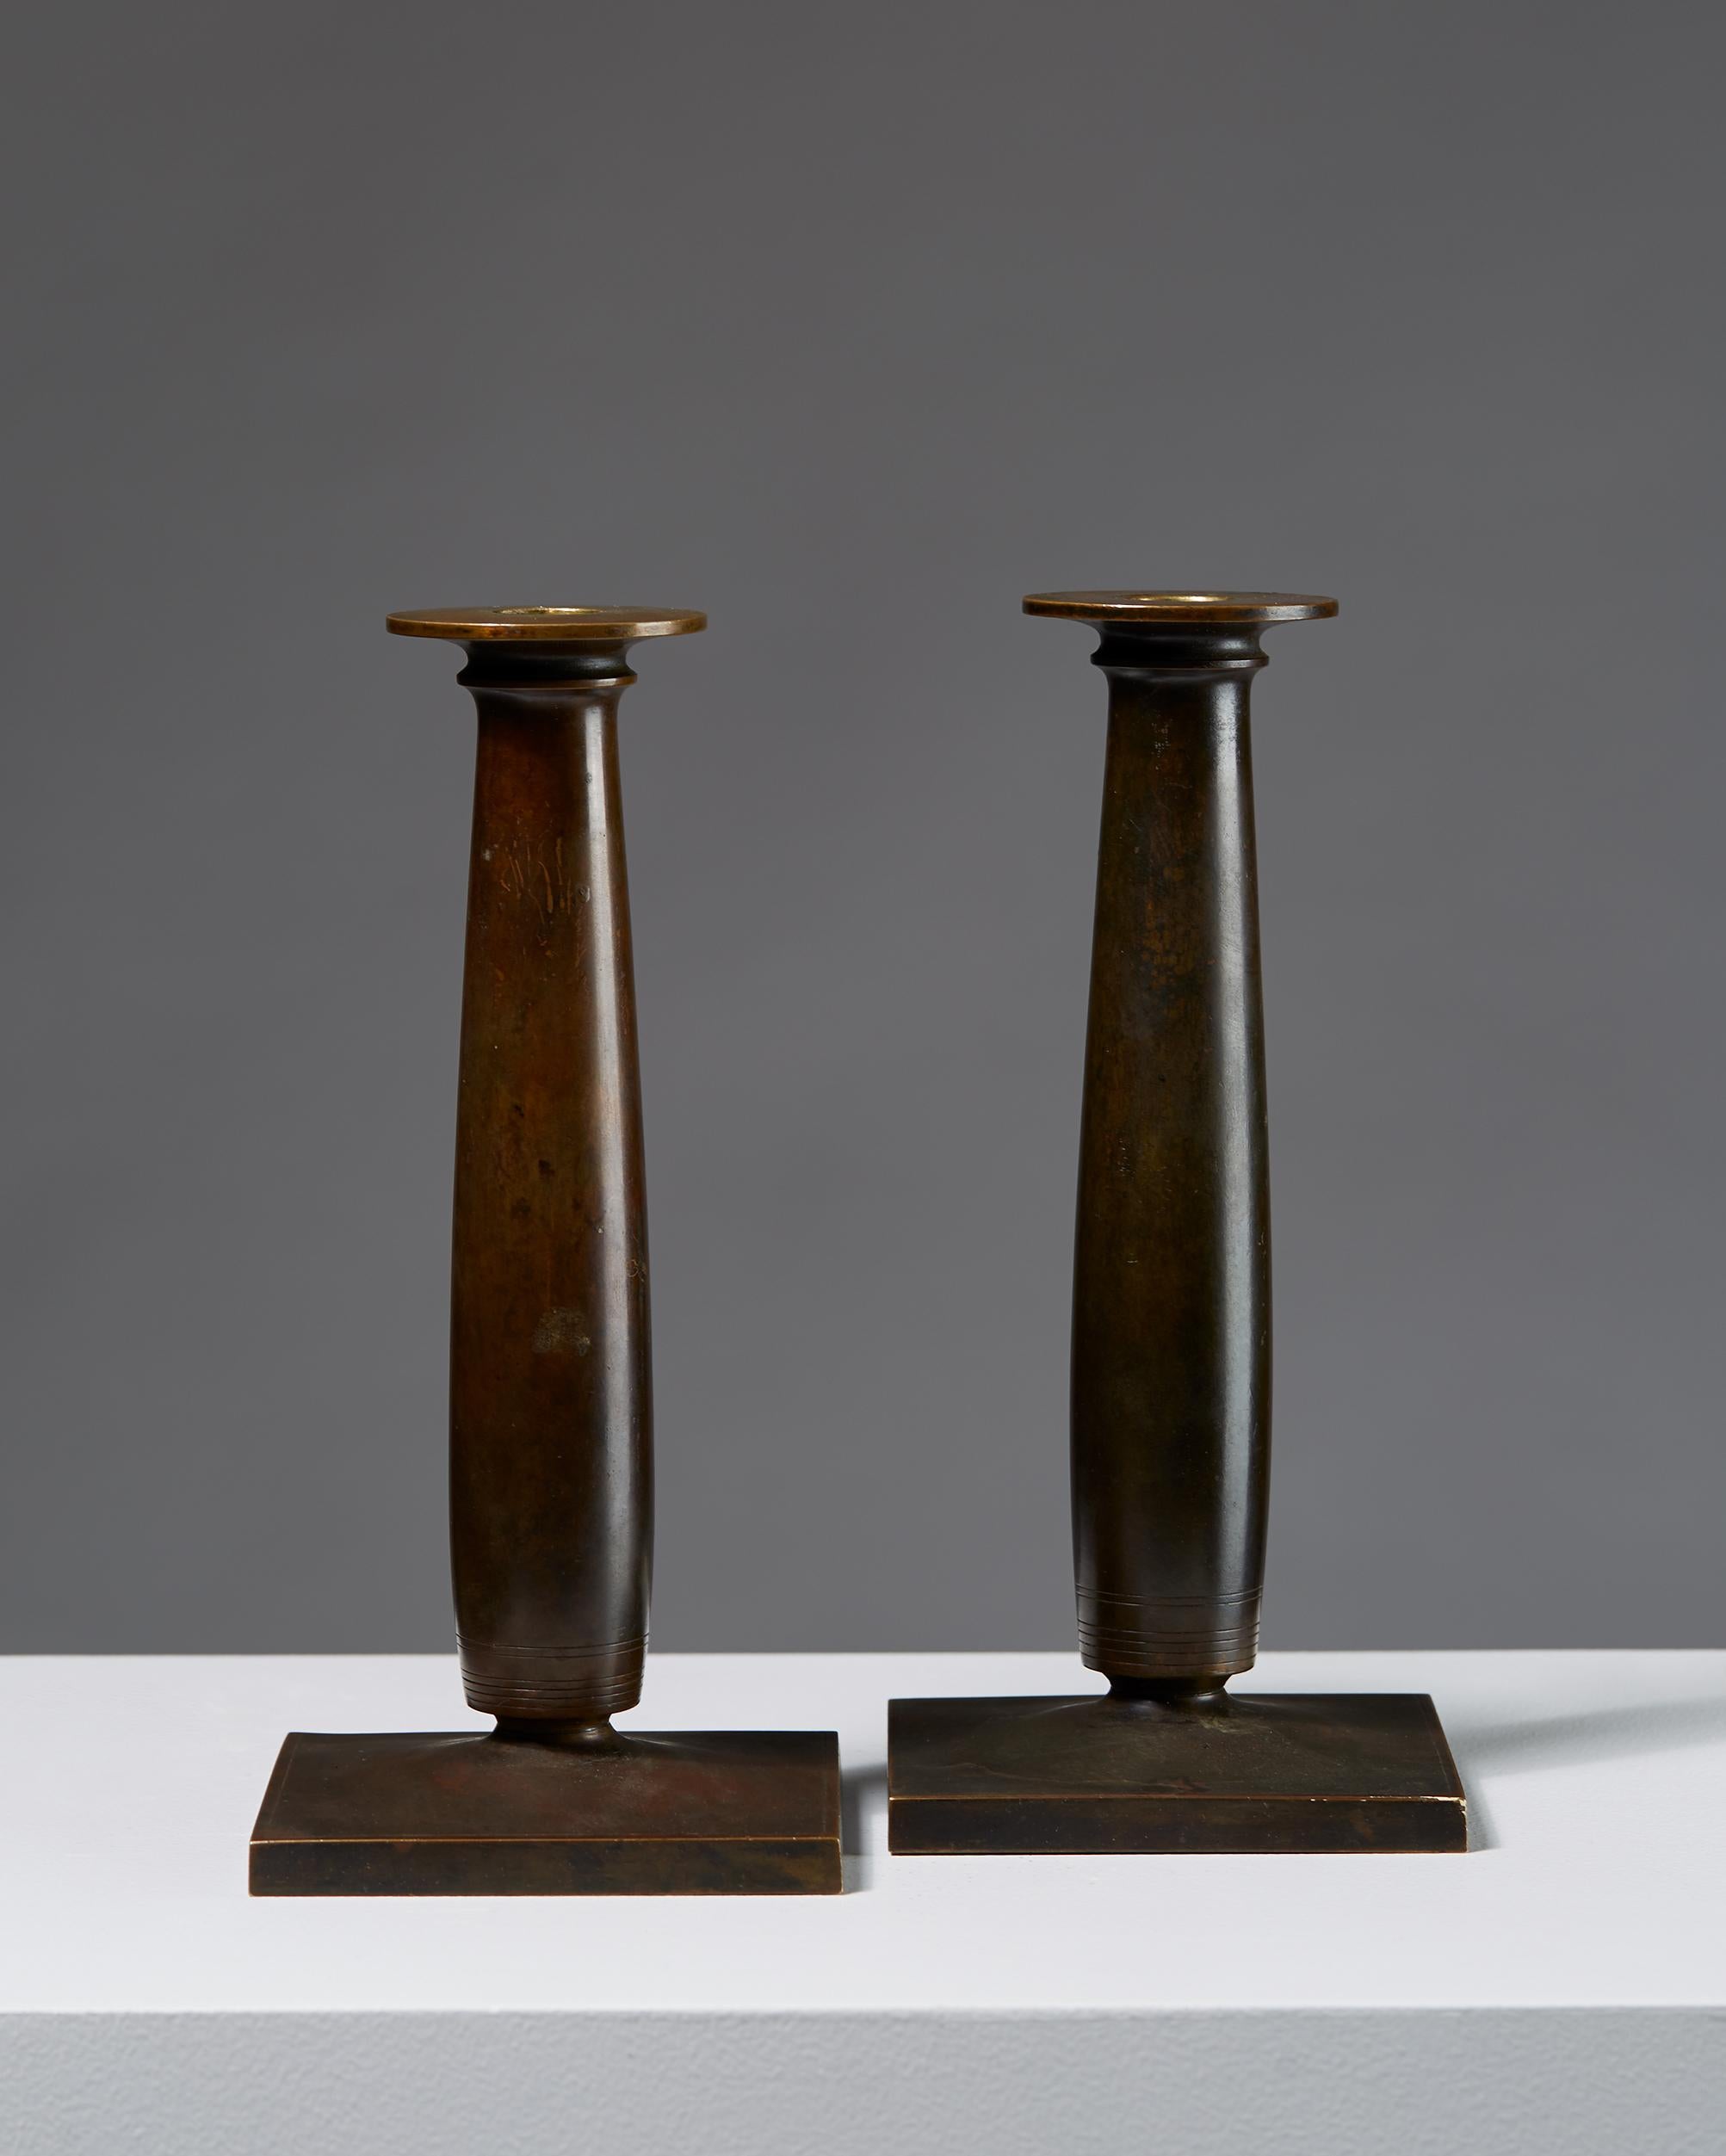 Swedish Pair of Bronze Candle Holders Designed by Just Andersen, Denmark. 1920s